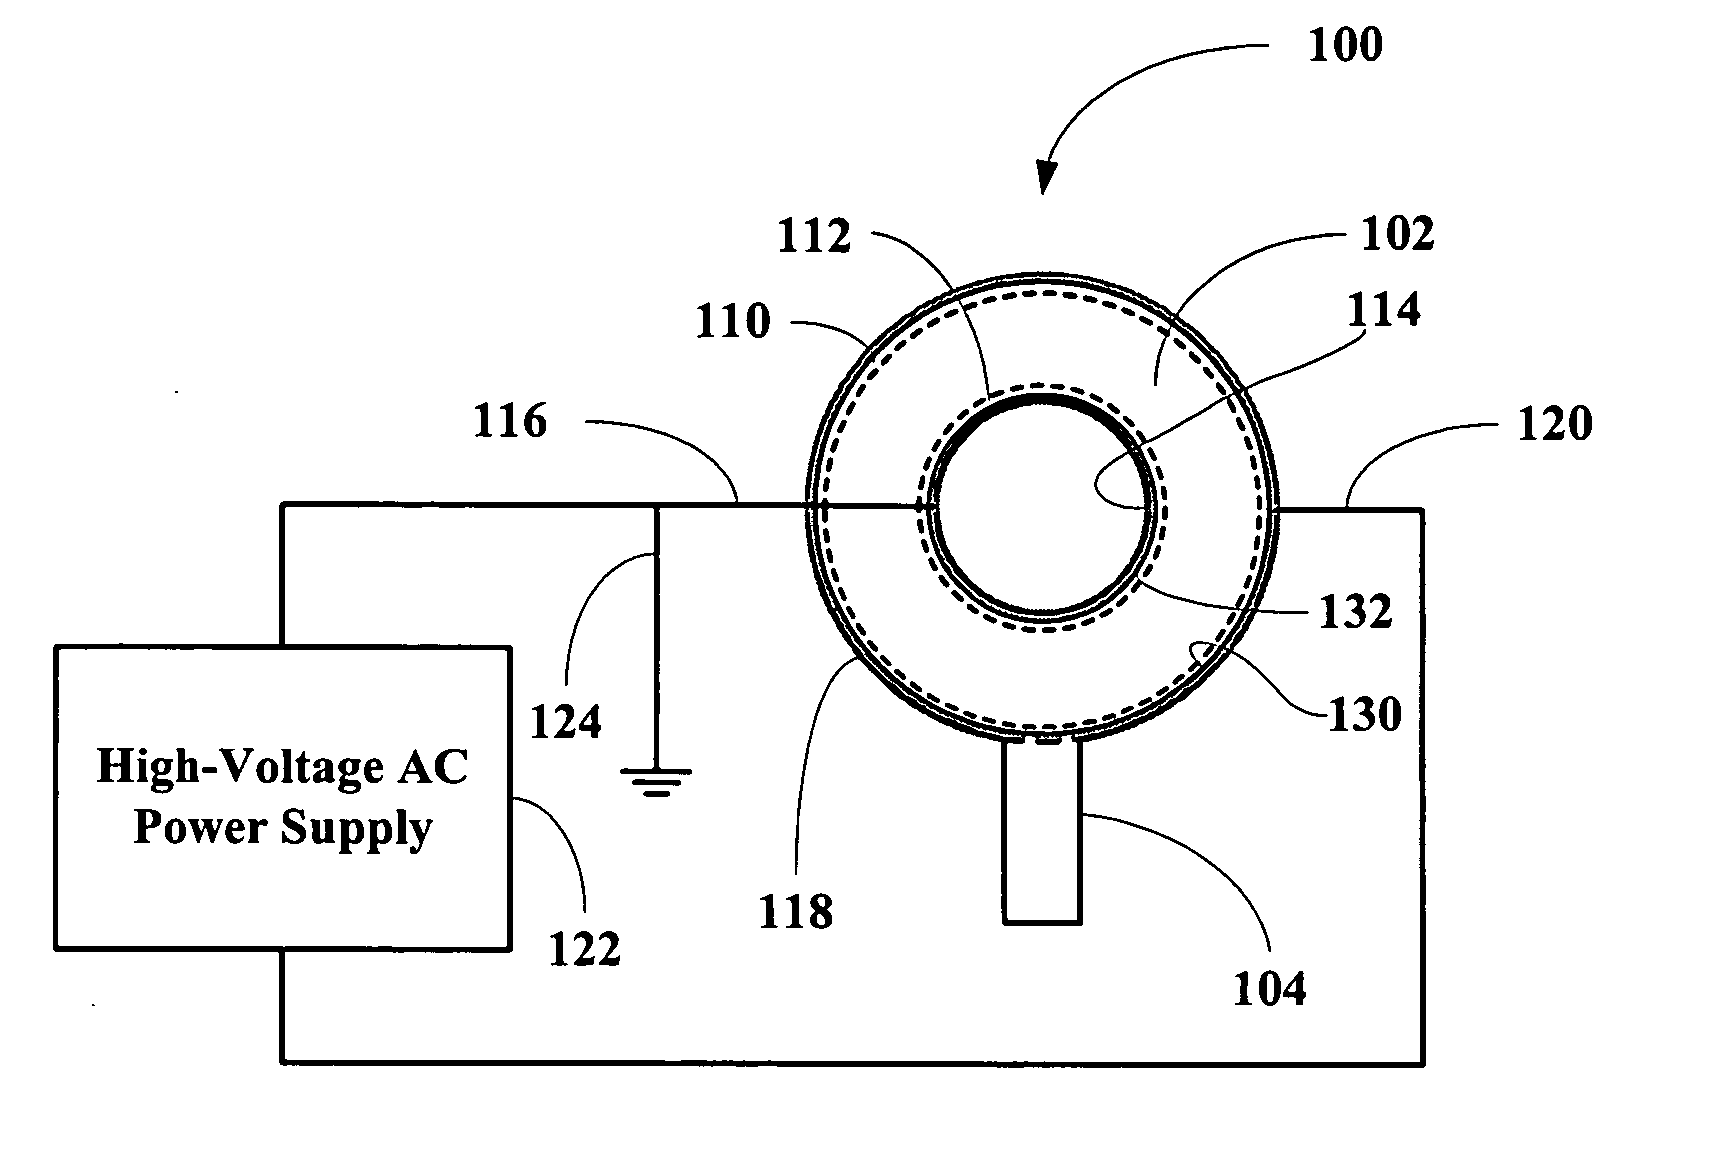 Ozone generator with dual dielectric barrier discharge and methods for using same